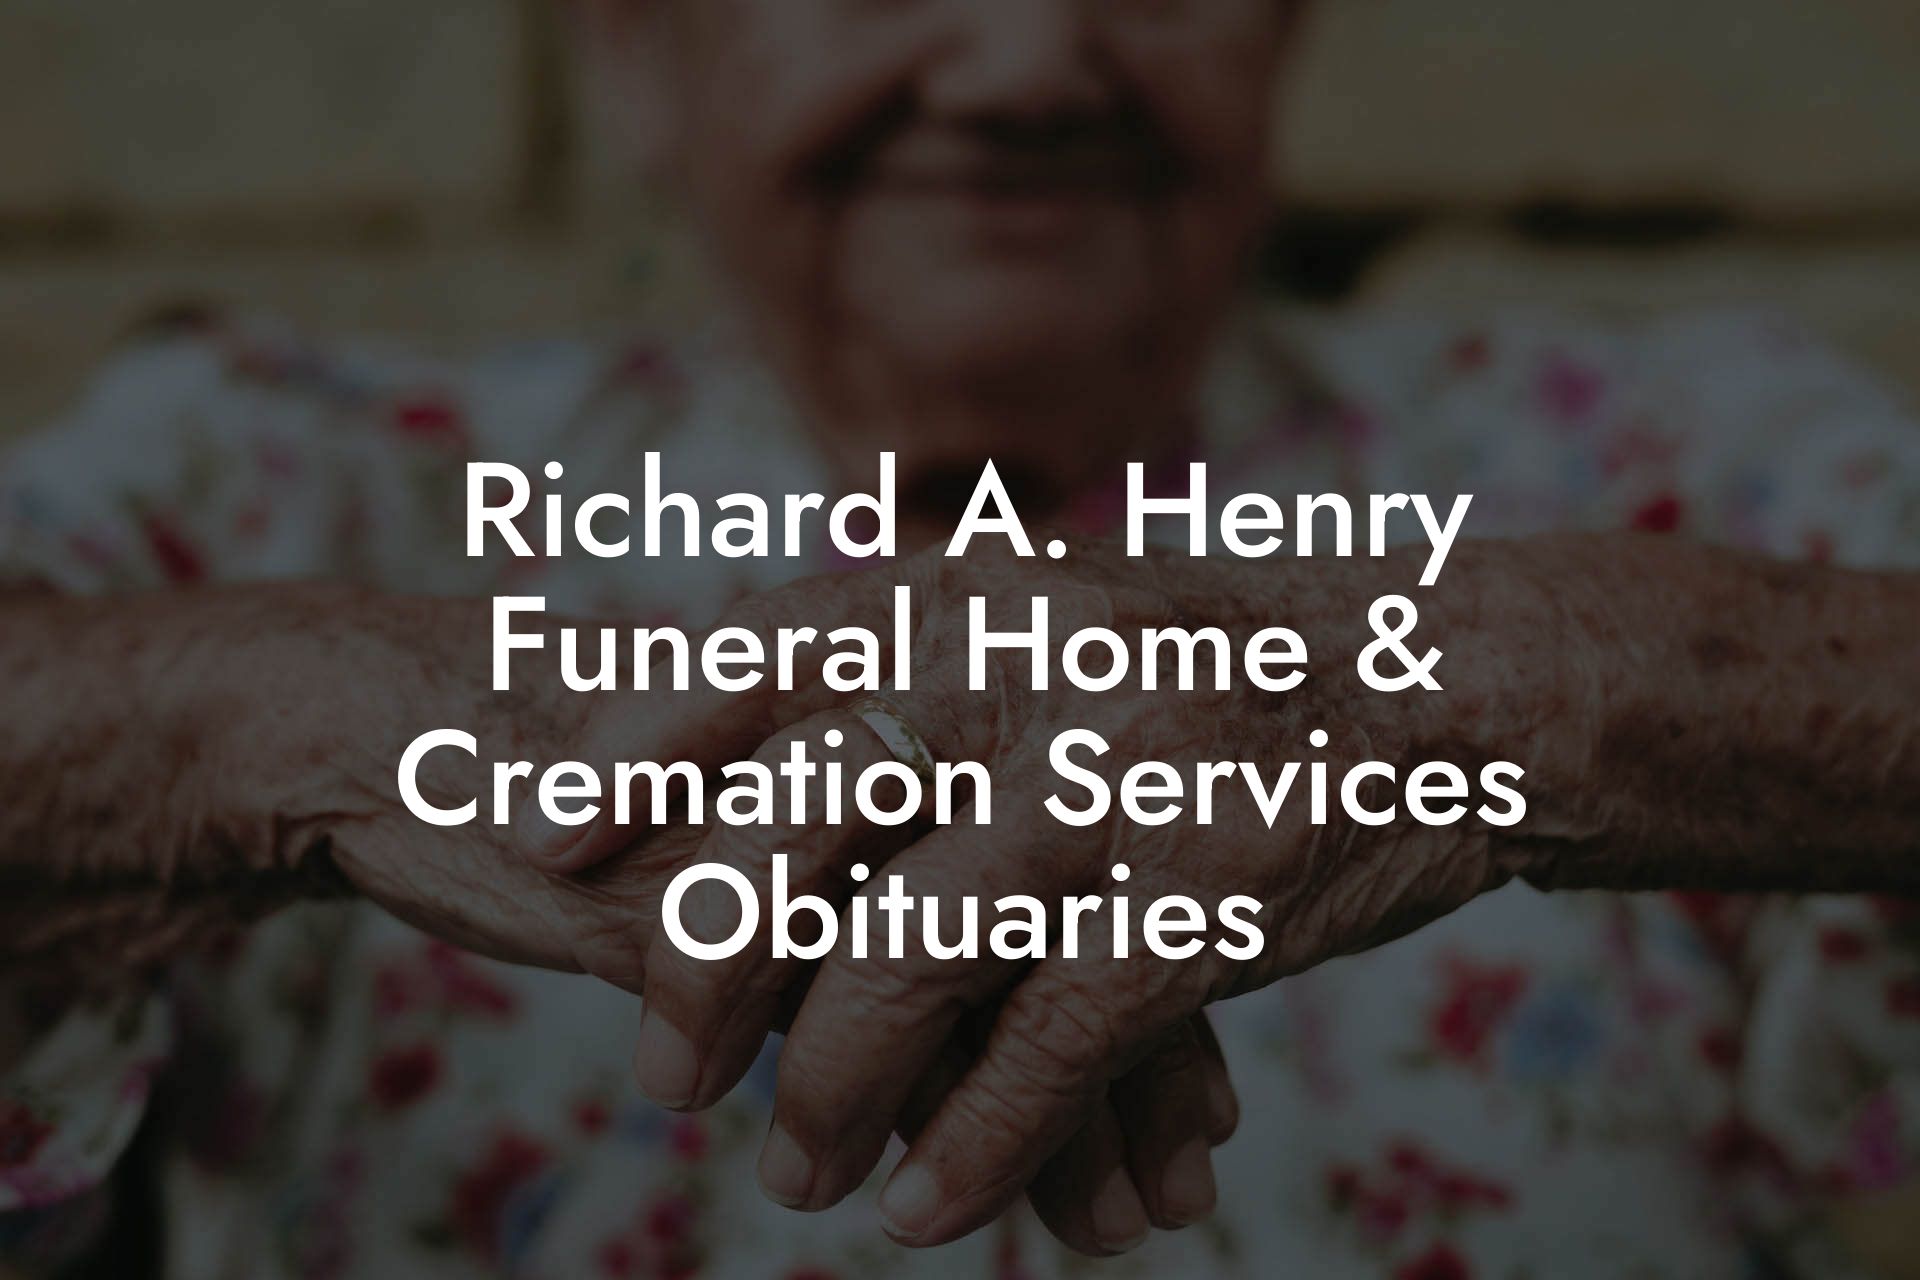 Richard A. Henry Funeral Home & Cremation Services Obituaries